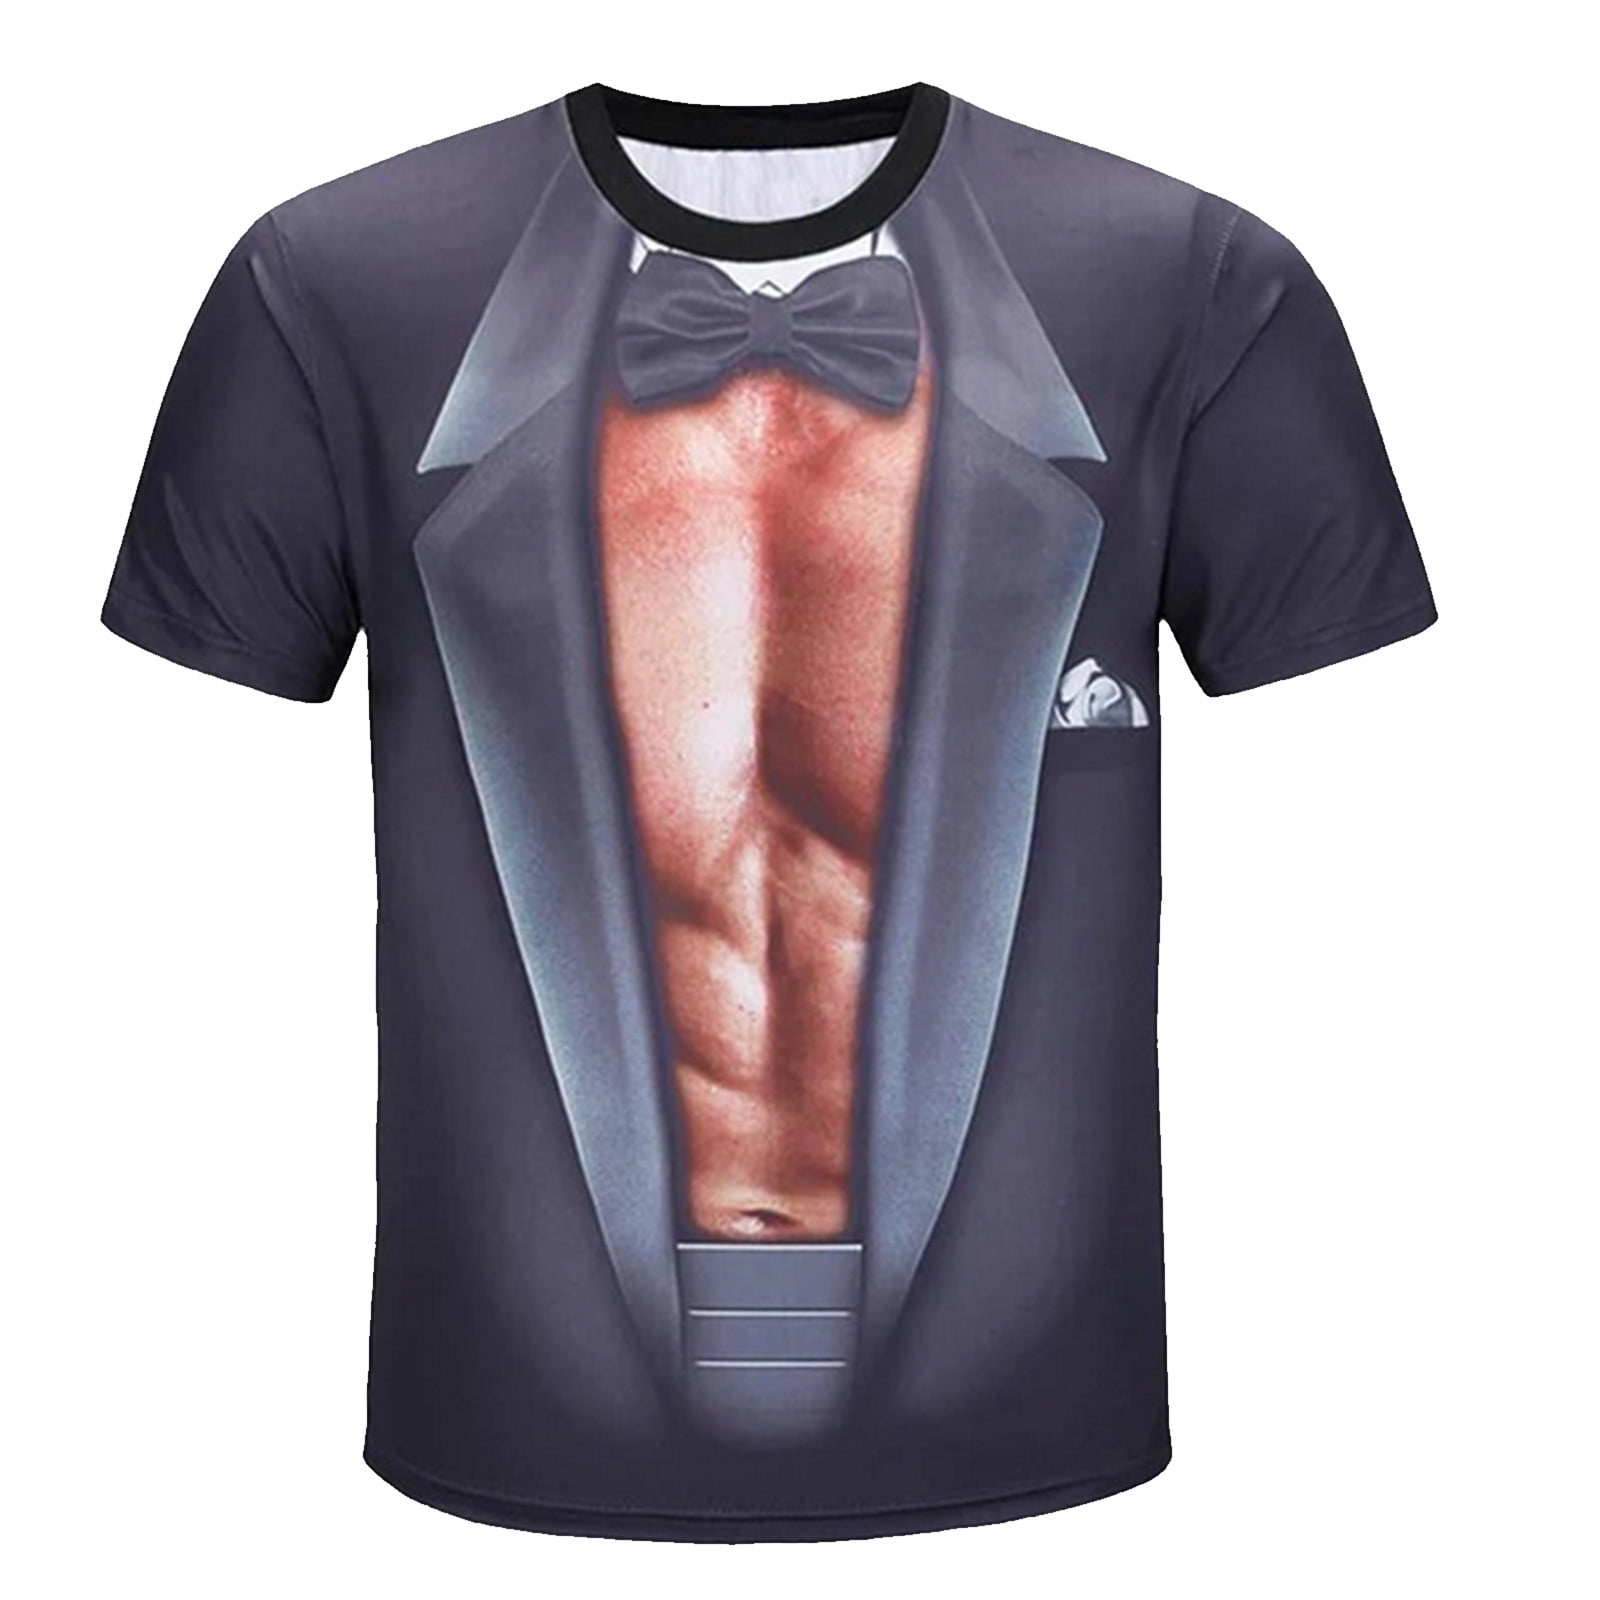 Deals Men's Muscle T-Shirts Novelty 3D Muscle Printed Shirts O-Neck Short Sleeve Tees Funny Simulation Body T-Shirt Blouses - Walmart.com